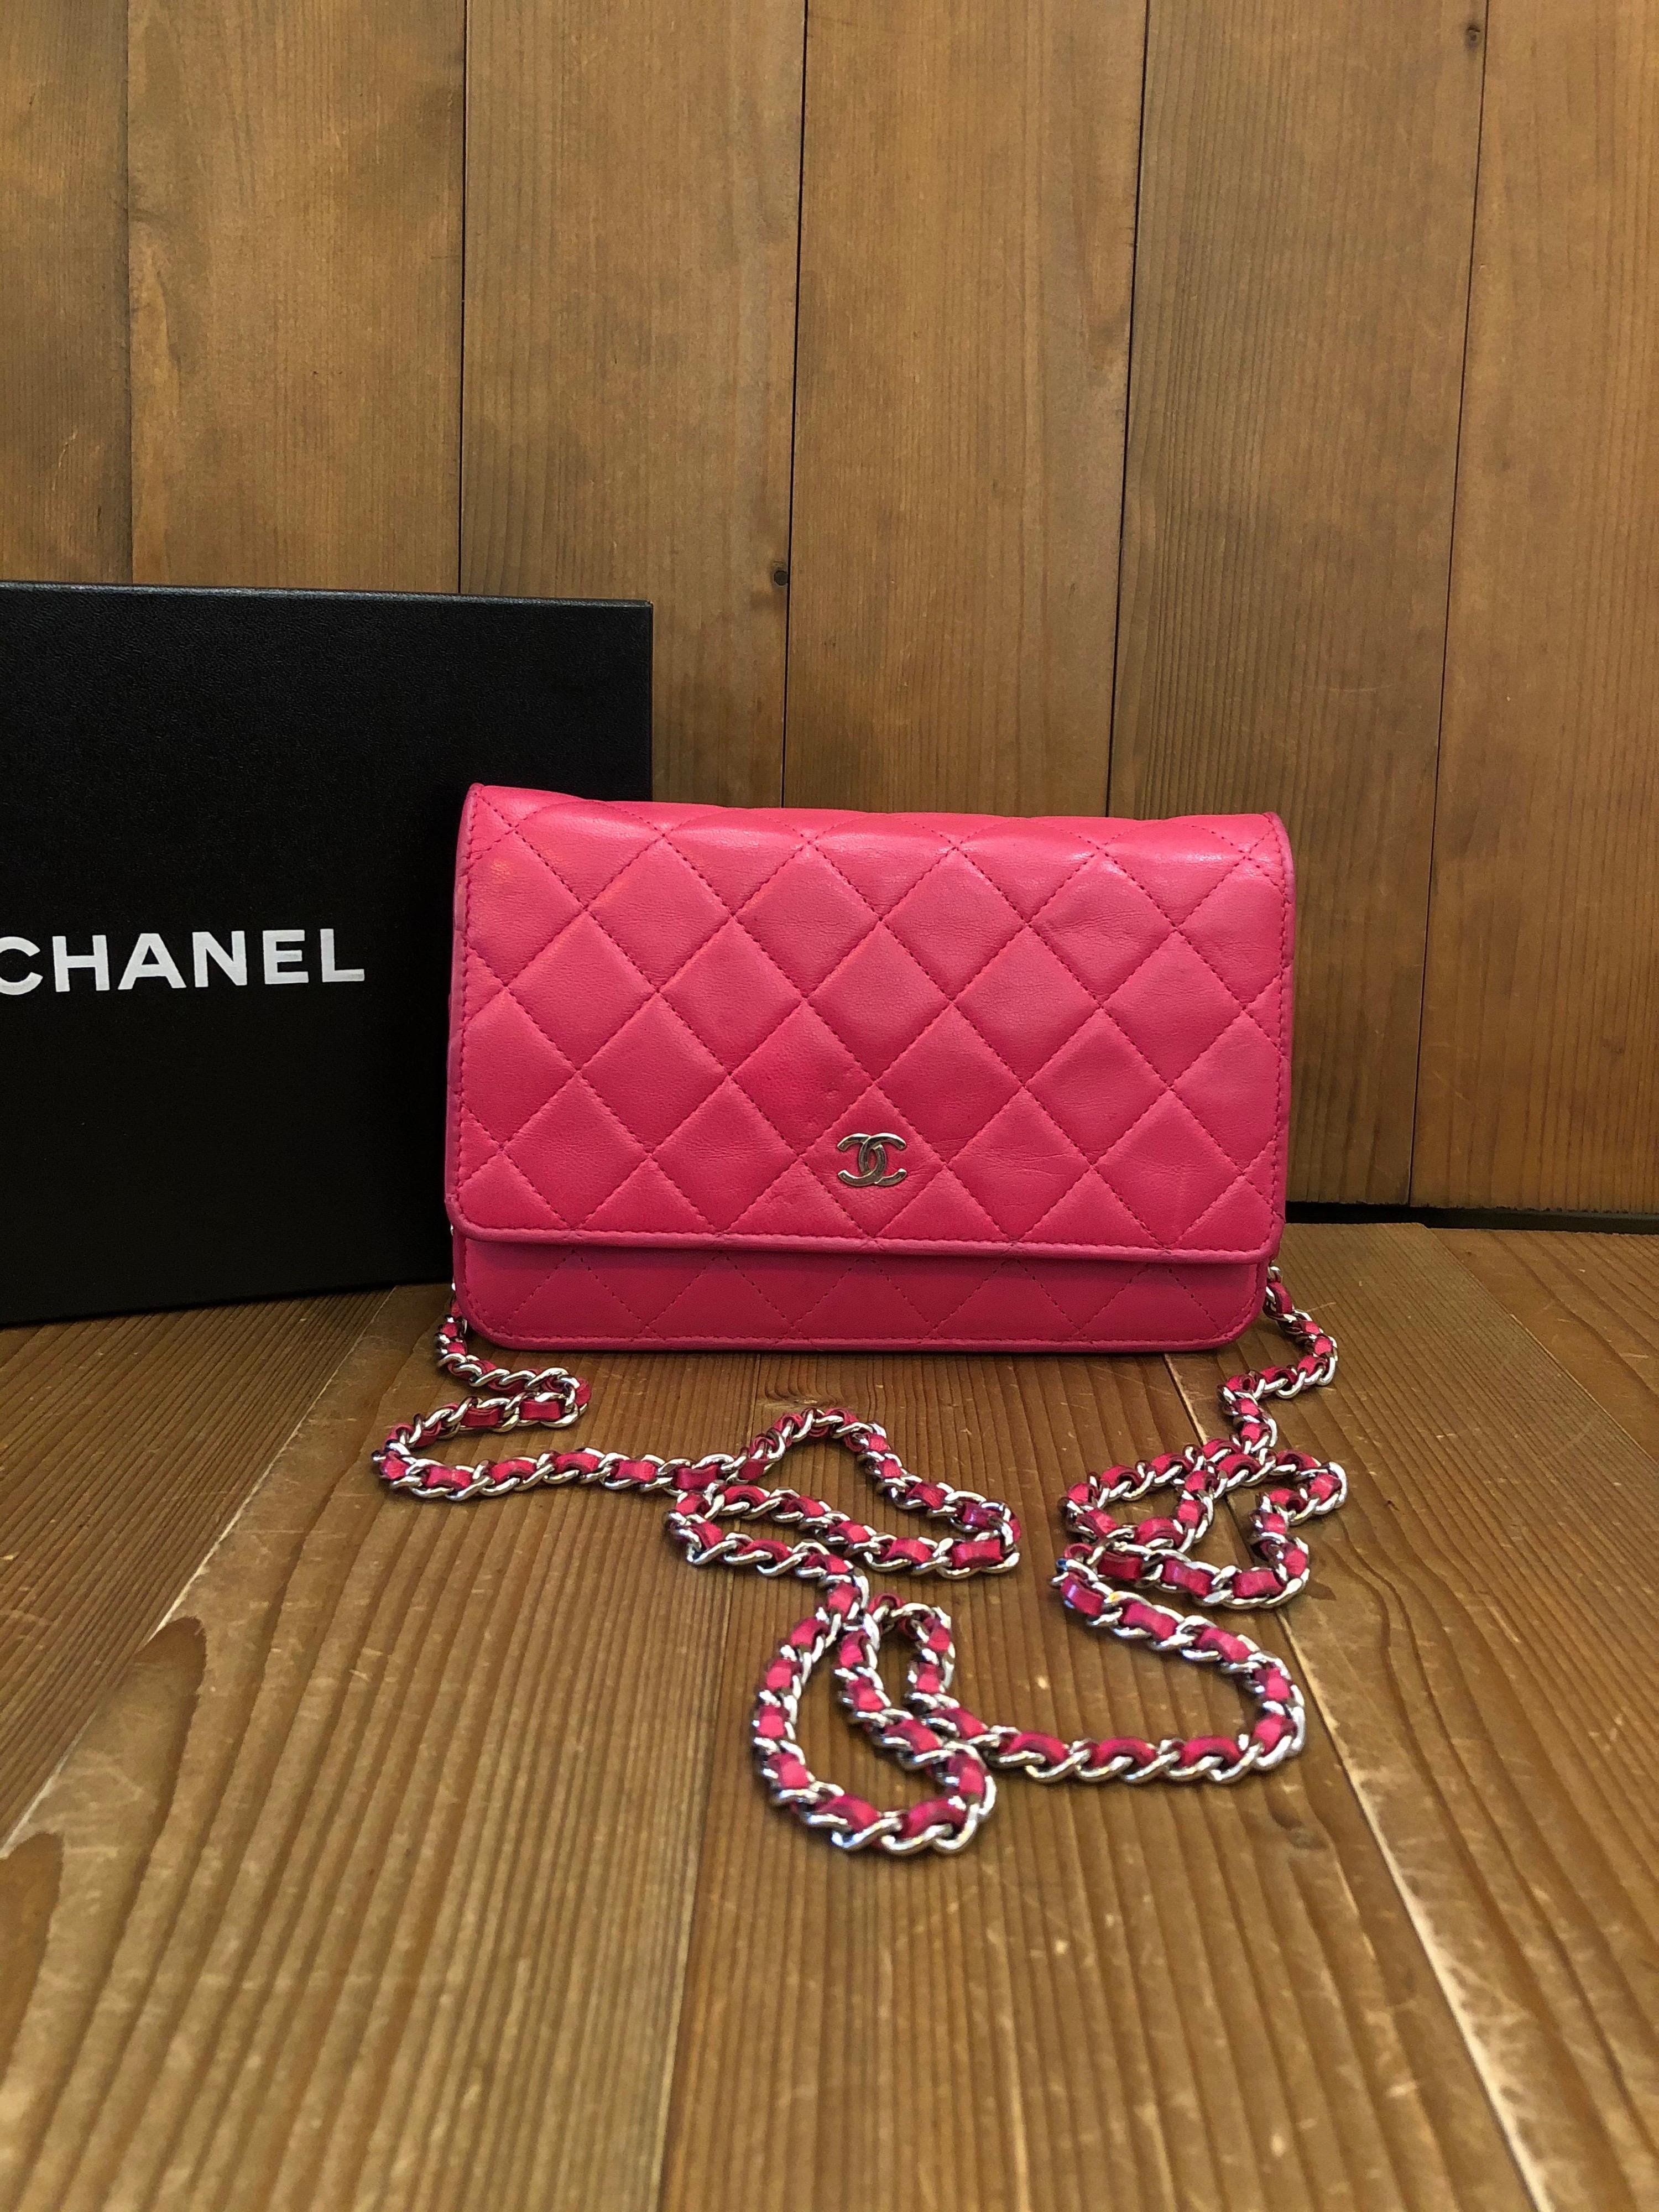 Chanel Pink Quilted Lamskin Leather Wallet on Chain WOC

Style: Bifold wallet
Material: Caviar/Lambskin leather 
Color: Pink with silver hardware wear 
Origin: Italy
Measurements: 19 x 13 x 3 cm
Comes with: Box/serial sticker

Condition:
Rank BC